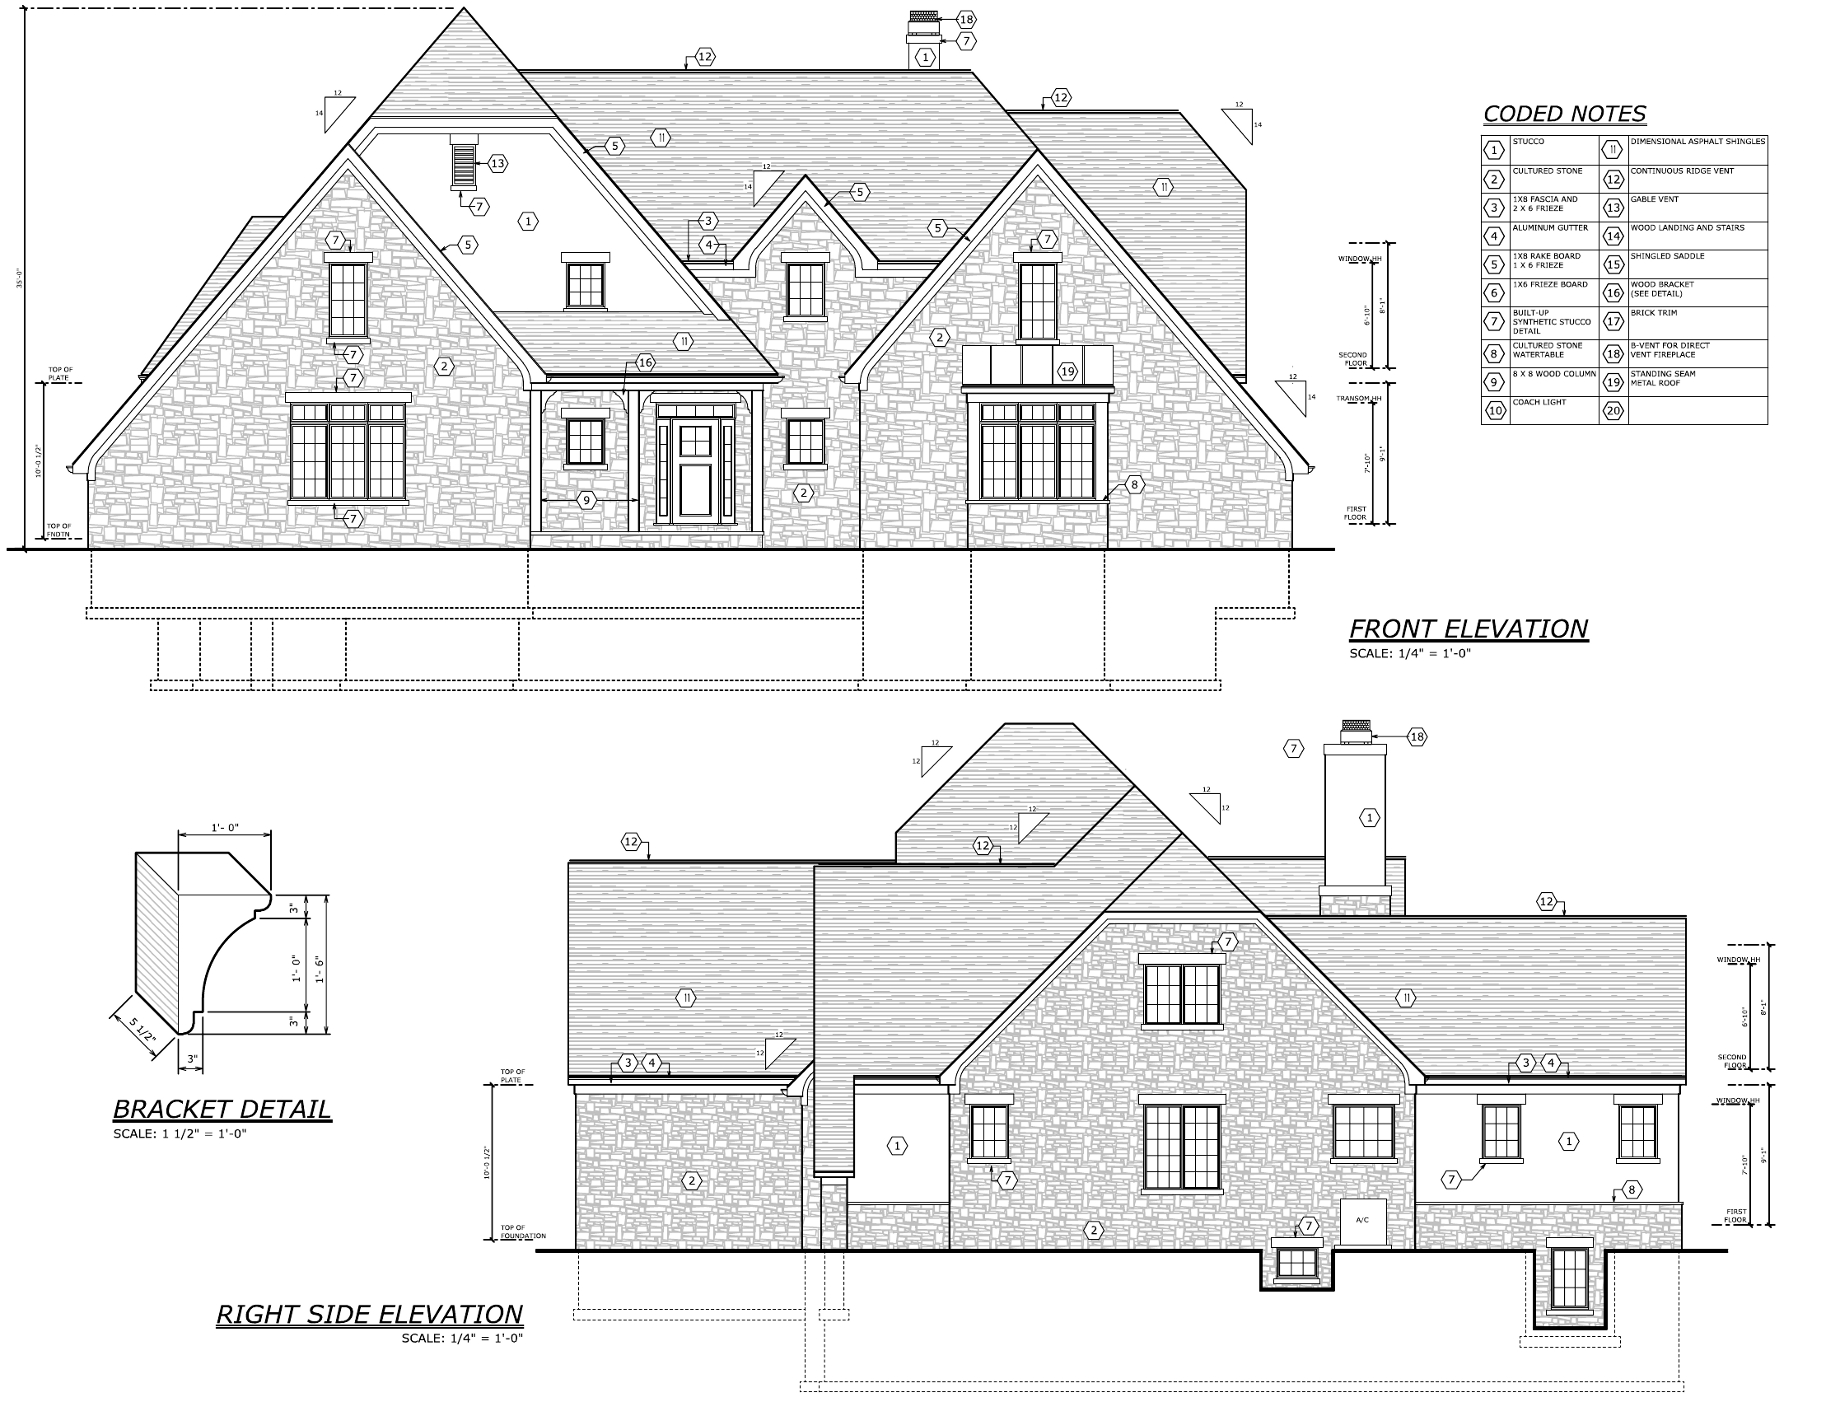 Exterior Elevation  Drawings  Ideas Architecture Plans  53158